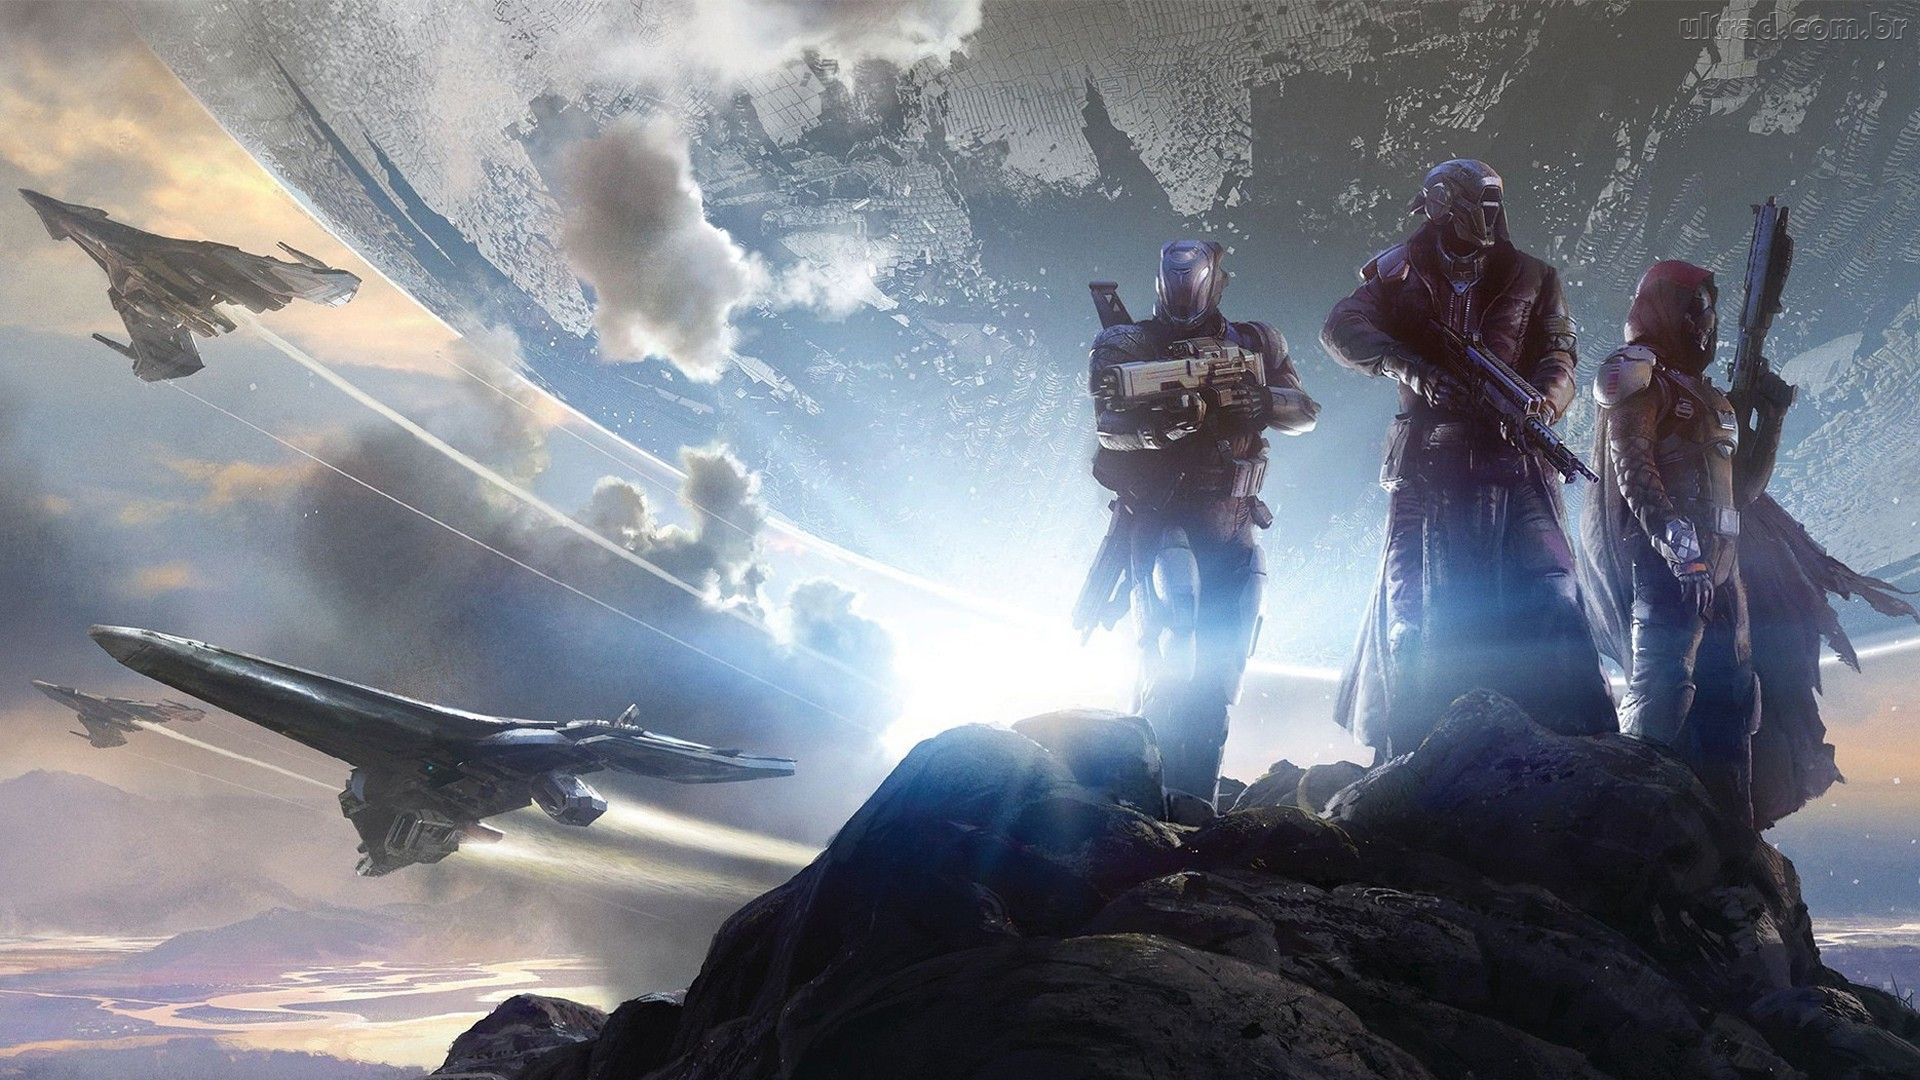 70 Awesome Destiny Wallpapers for your Computer Tablet or Phone 1920x1080